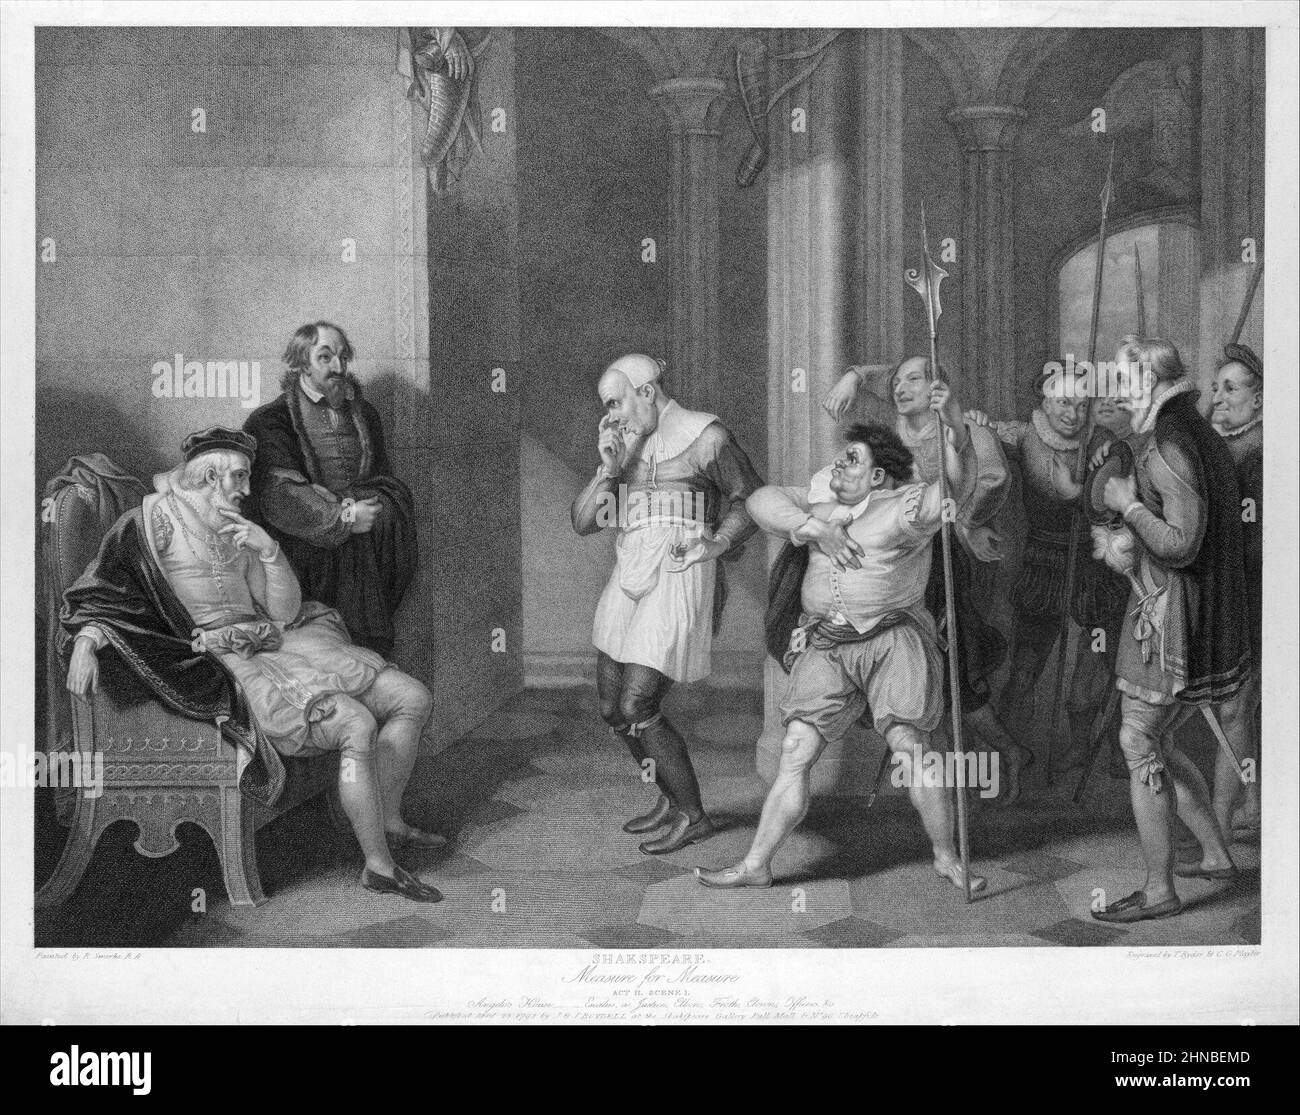 Escalus, a Justice, Elbow, Froth, Clown, Officers, etc. at Angelo's house, from Shakespeare, Measure for Measure, Act 2, Scene 1 Stock Photo